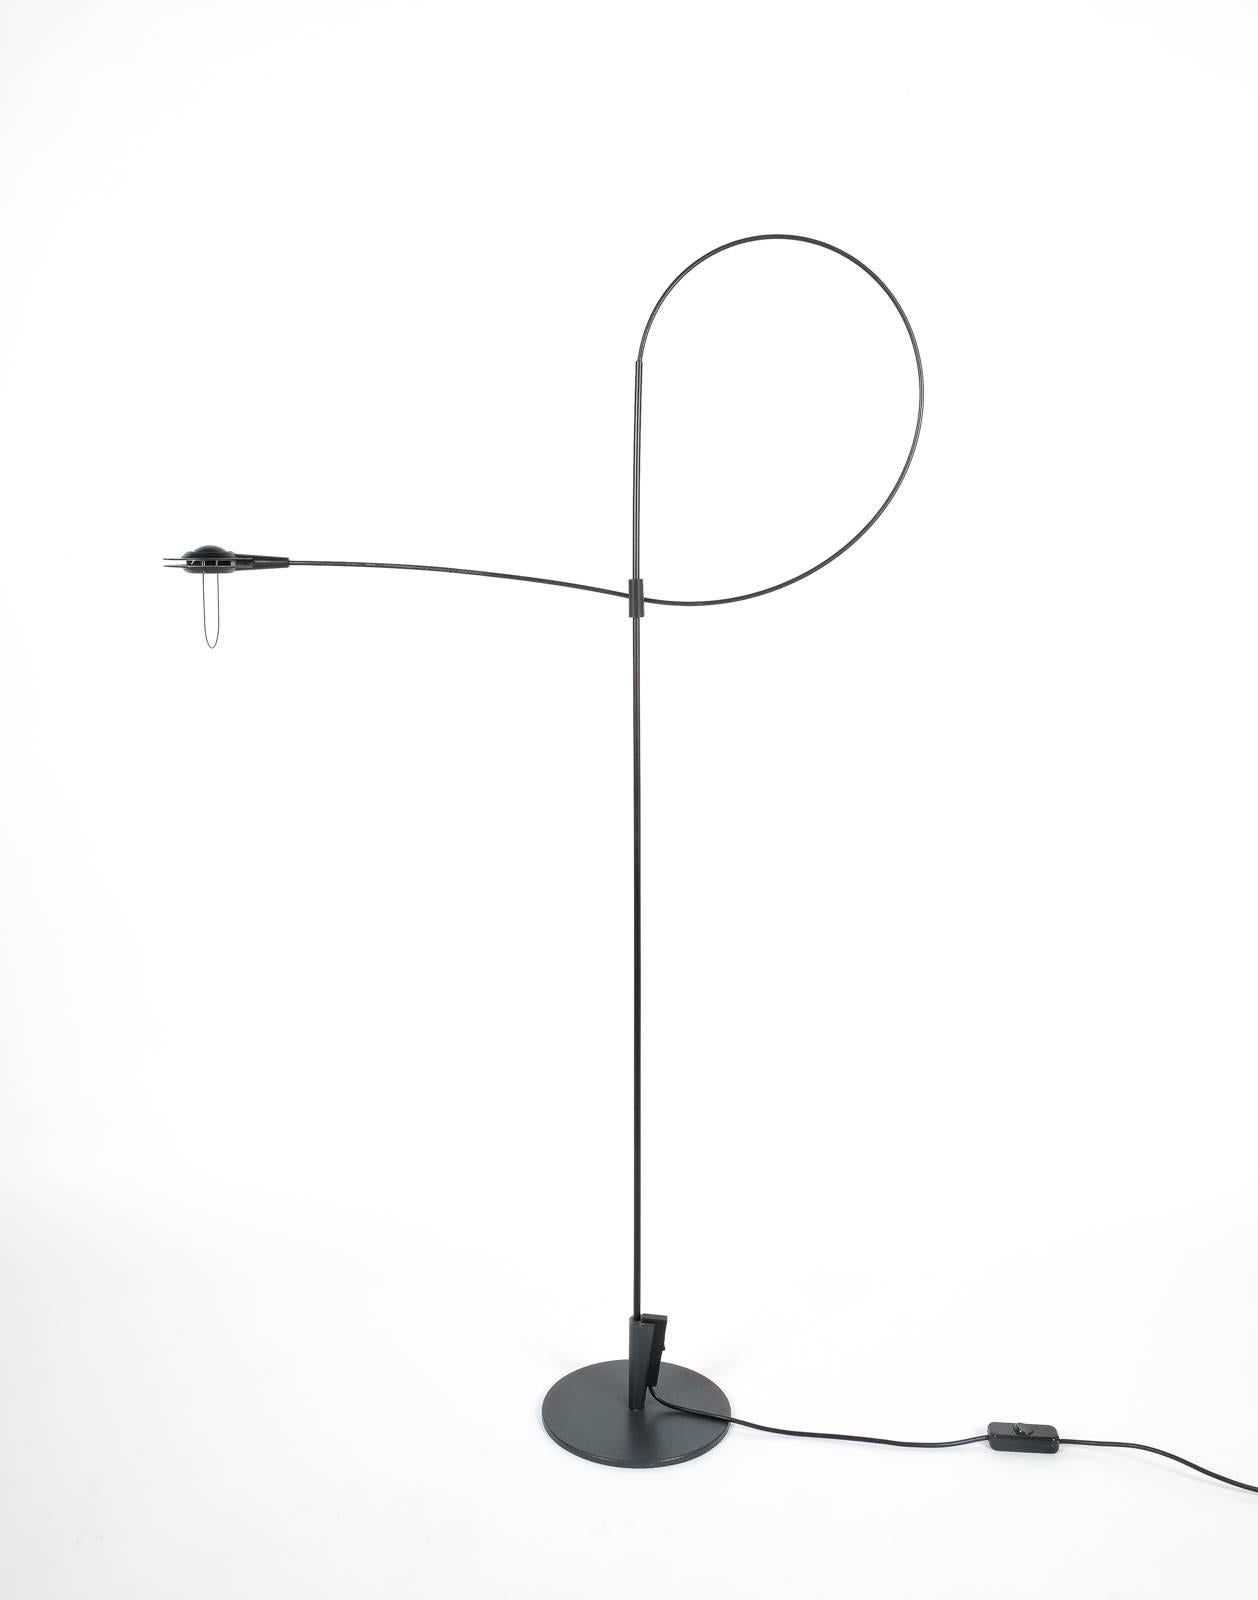 Rare floor lamp by Rene Kemna for Sirrah. Designed in Italy, circa 1980s. Anodized metal and flexible fiberglass structure allows the light and shade to articulate into various positions.